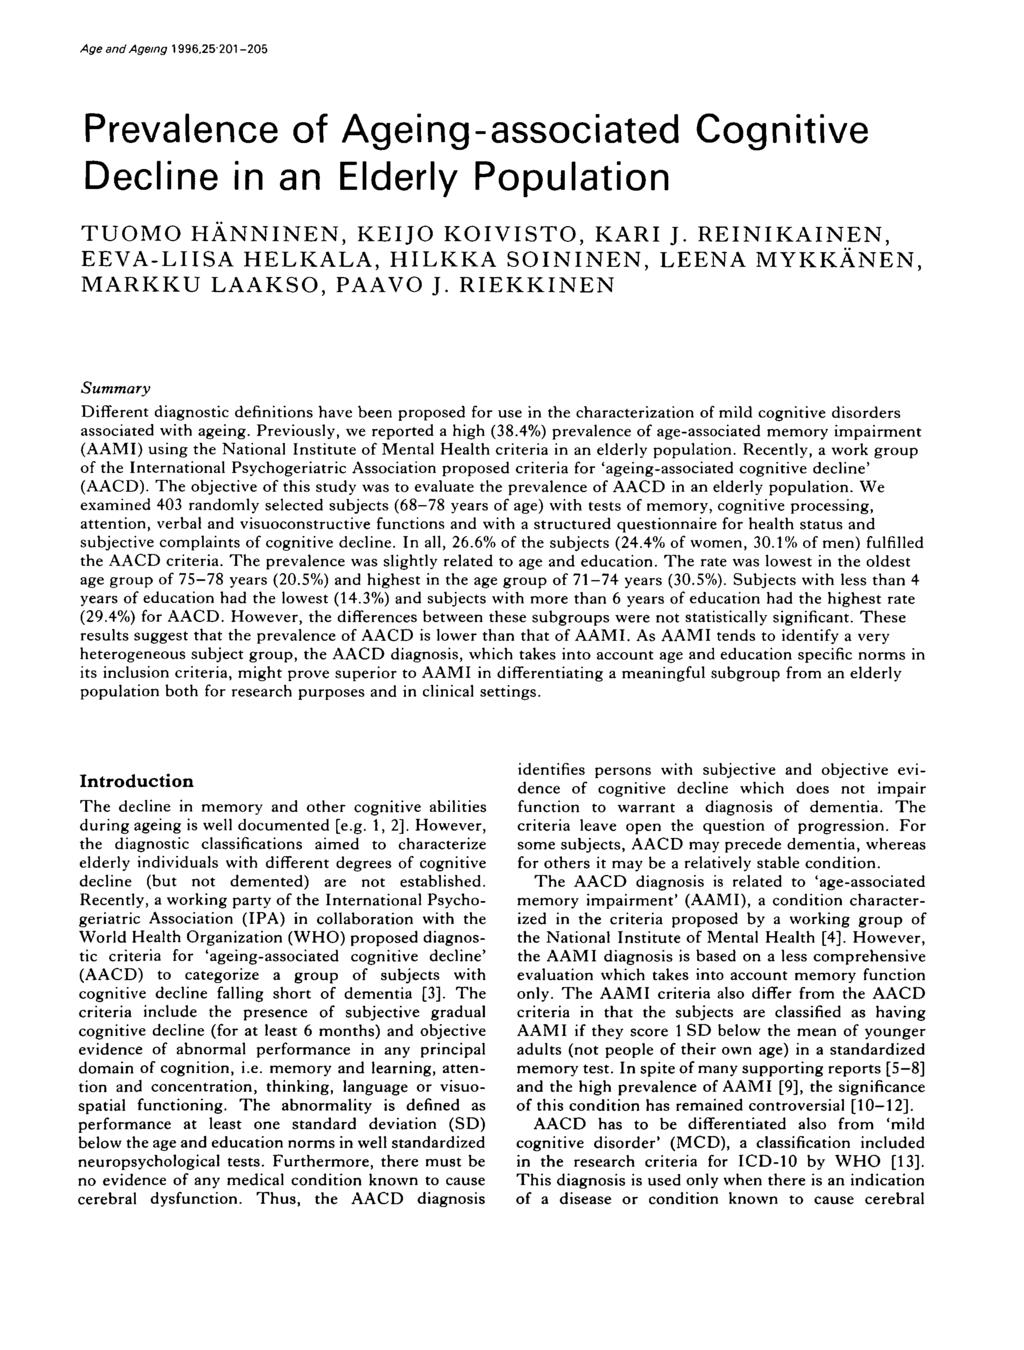 Age and Ageing 1996.25201-205 Prevalence of Ageing-associated Cognitive Decline in an Elderly Population TUOMO HANNINEN, KEIJO KOIVISTO, KARI J.